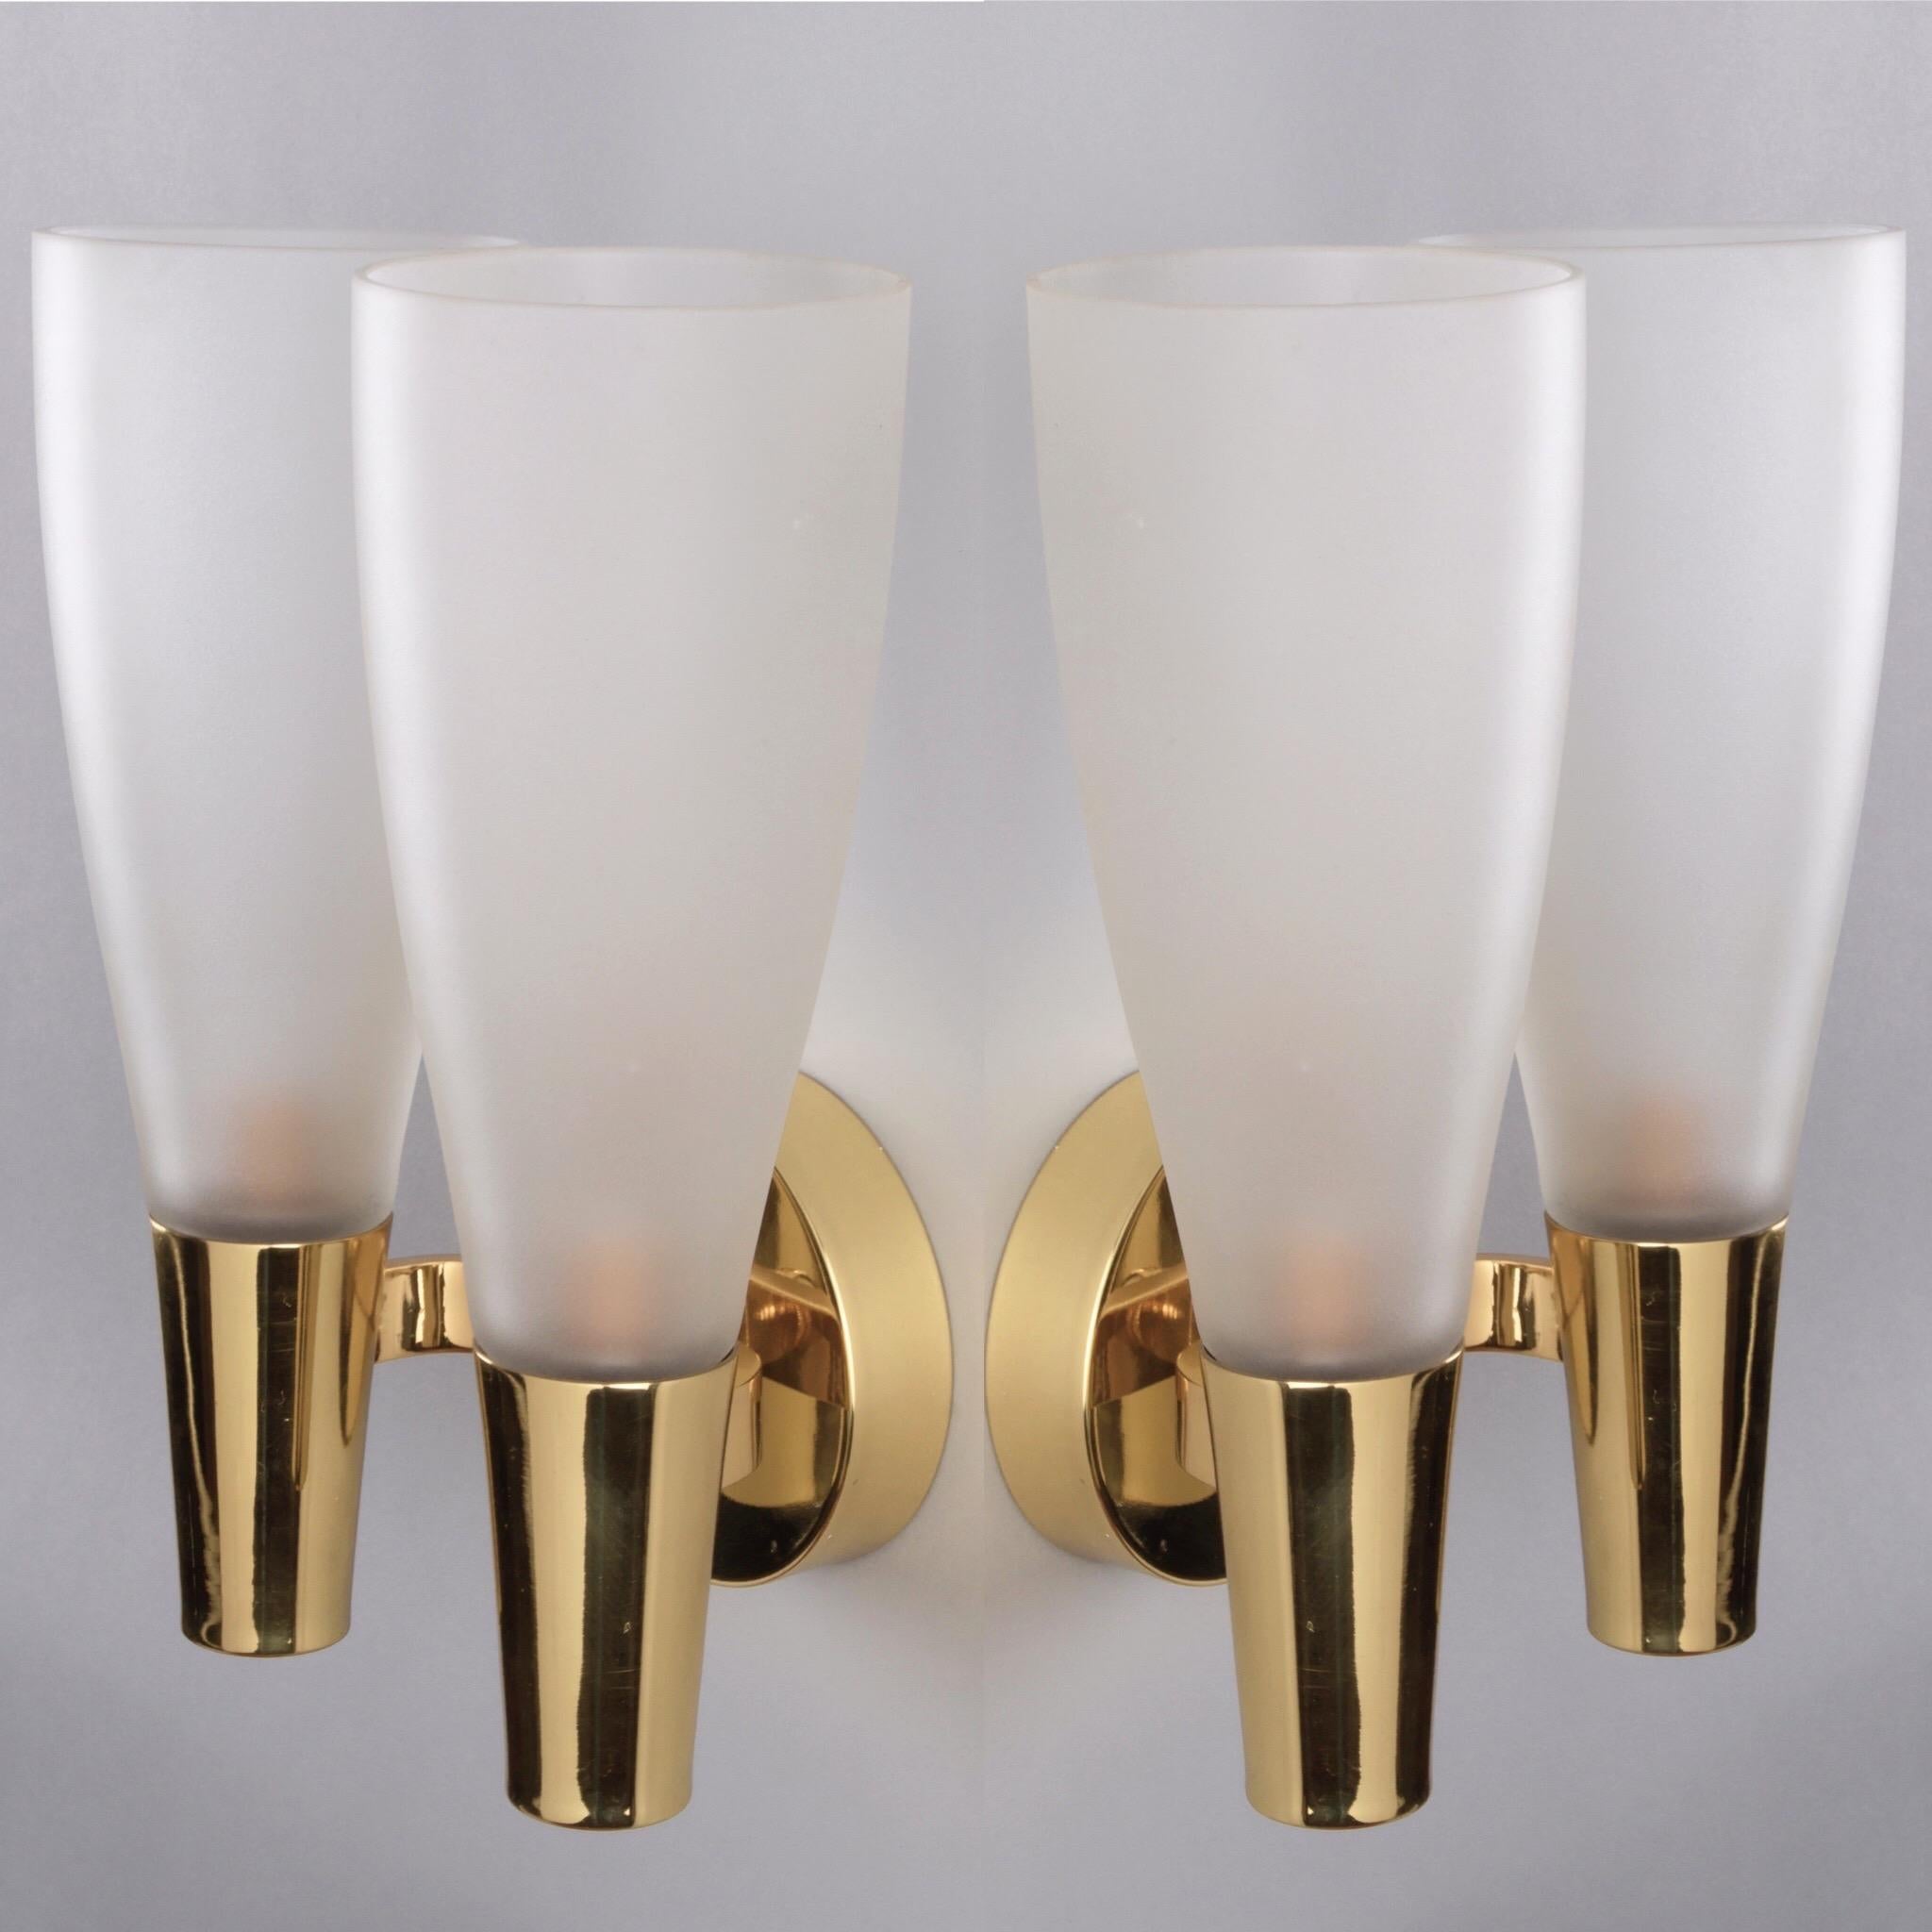 Pietro Chiesa for Fontana Arte Brass Sconces with Two Glass Shades, Italy 1940s 1